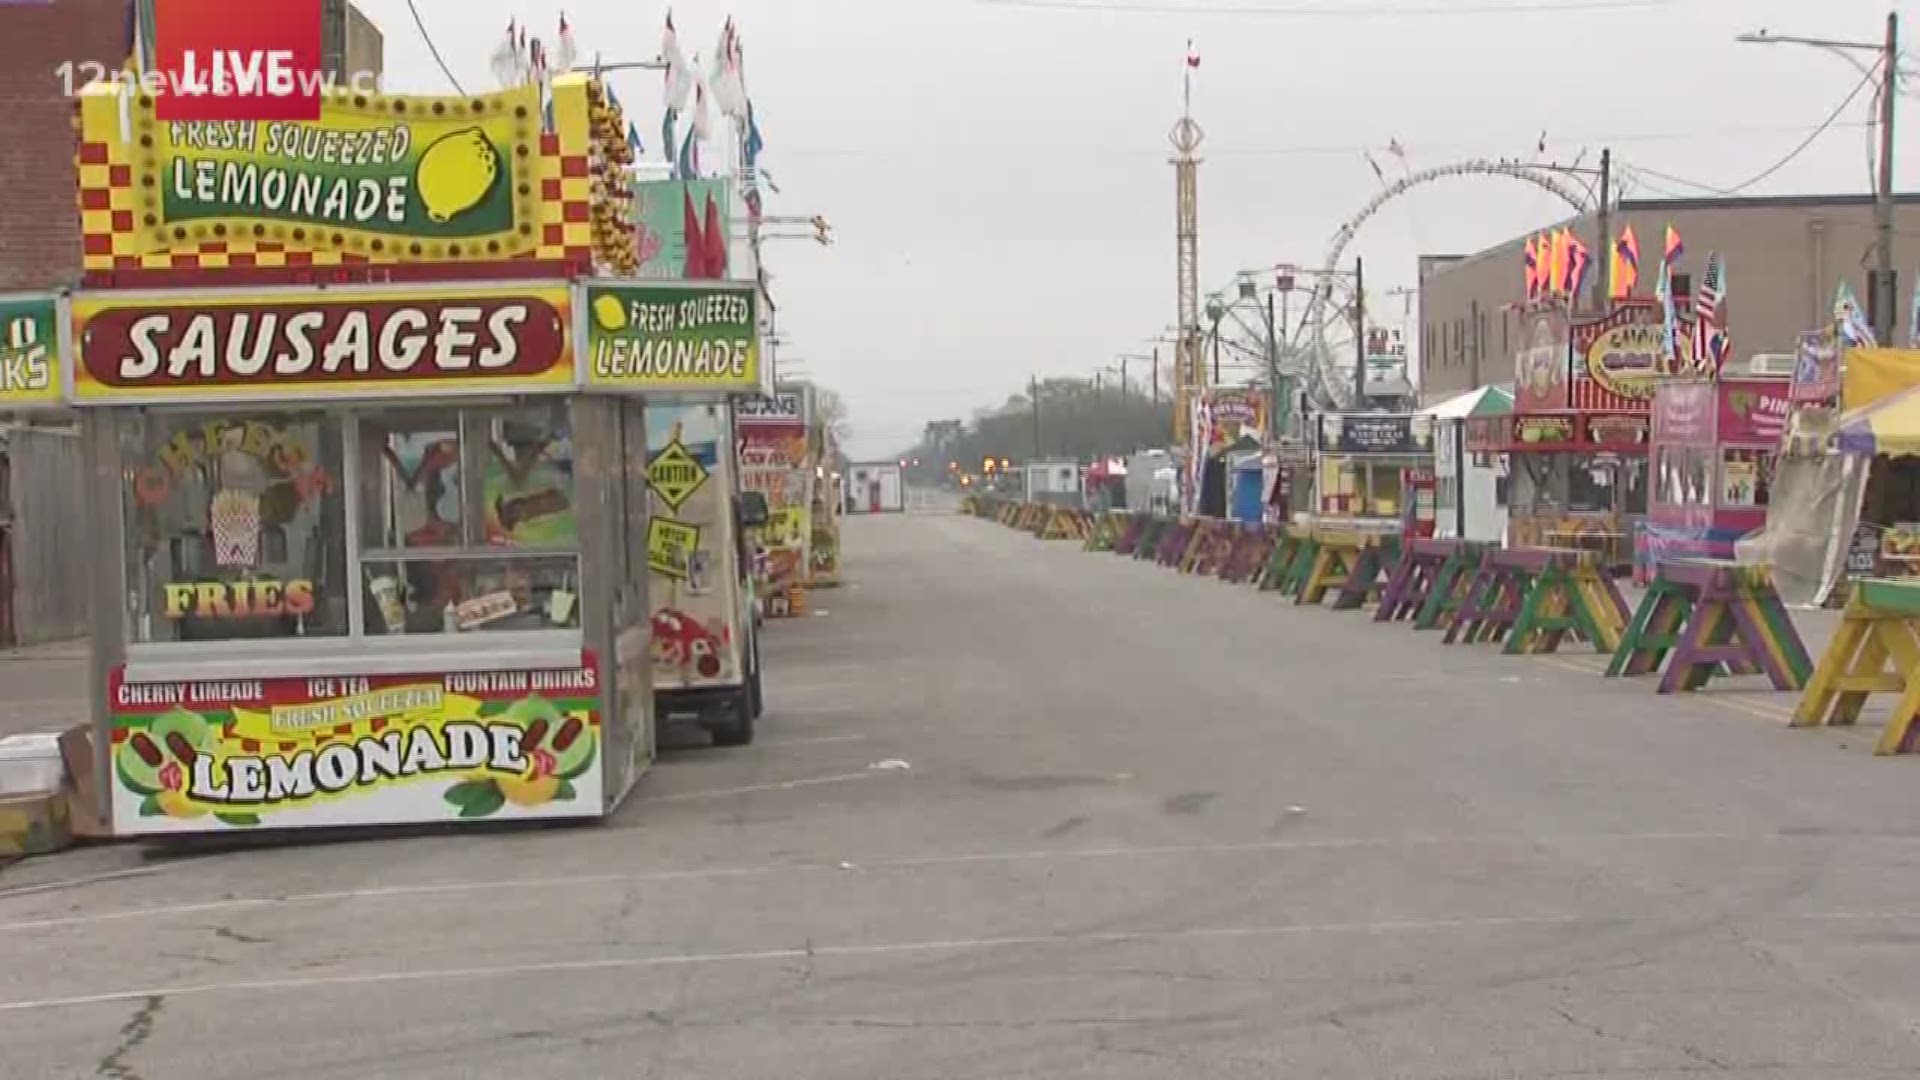 Crossroads, Mike and the Moon Pies, Gerald Delafose and the Zydeco Gators, and Koe Wetzel are just a few of the names preforming tonight during the Mardi Gras of Southeast Texas event in downtown Port Arthur.